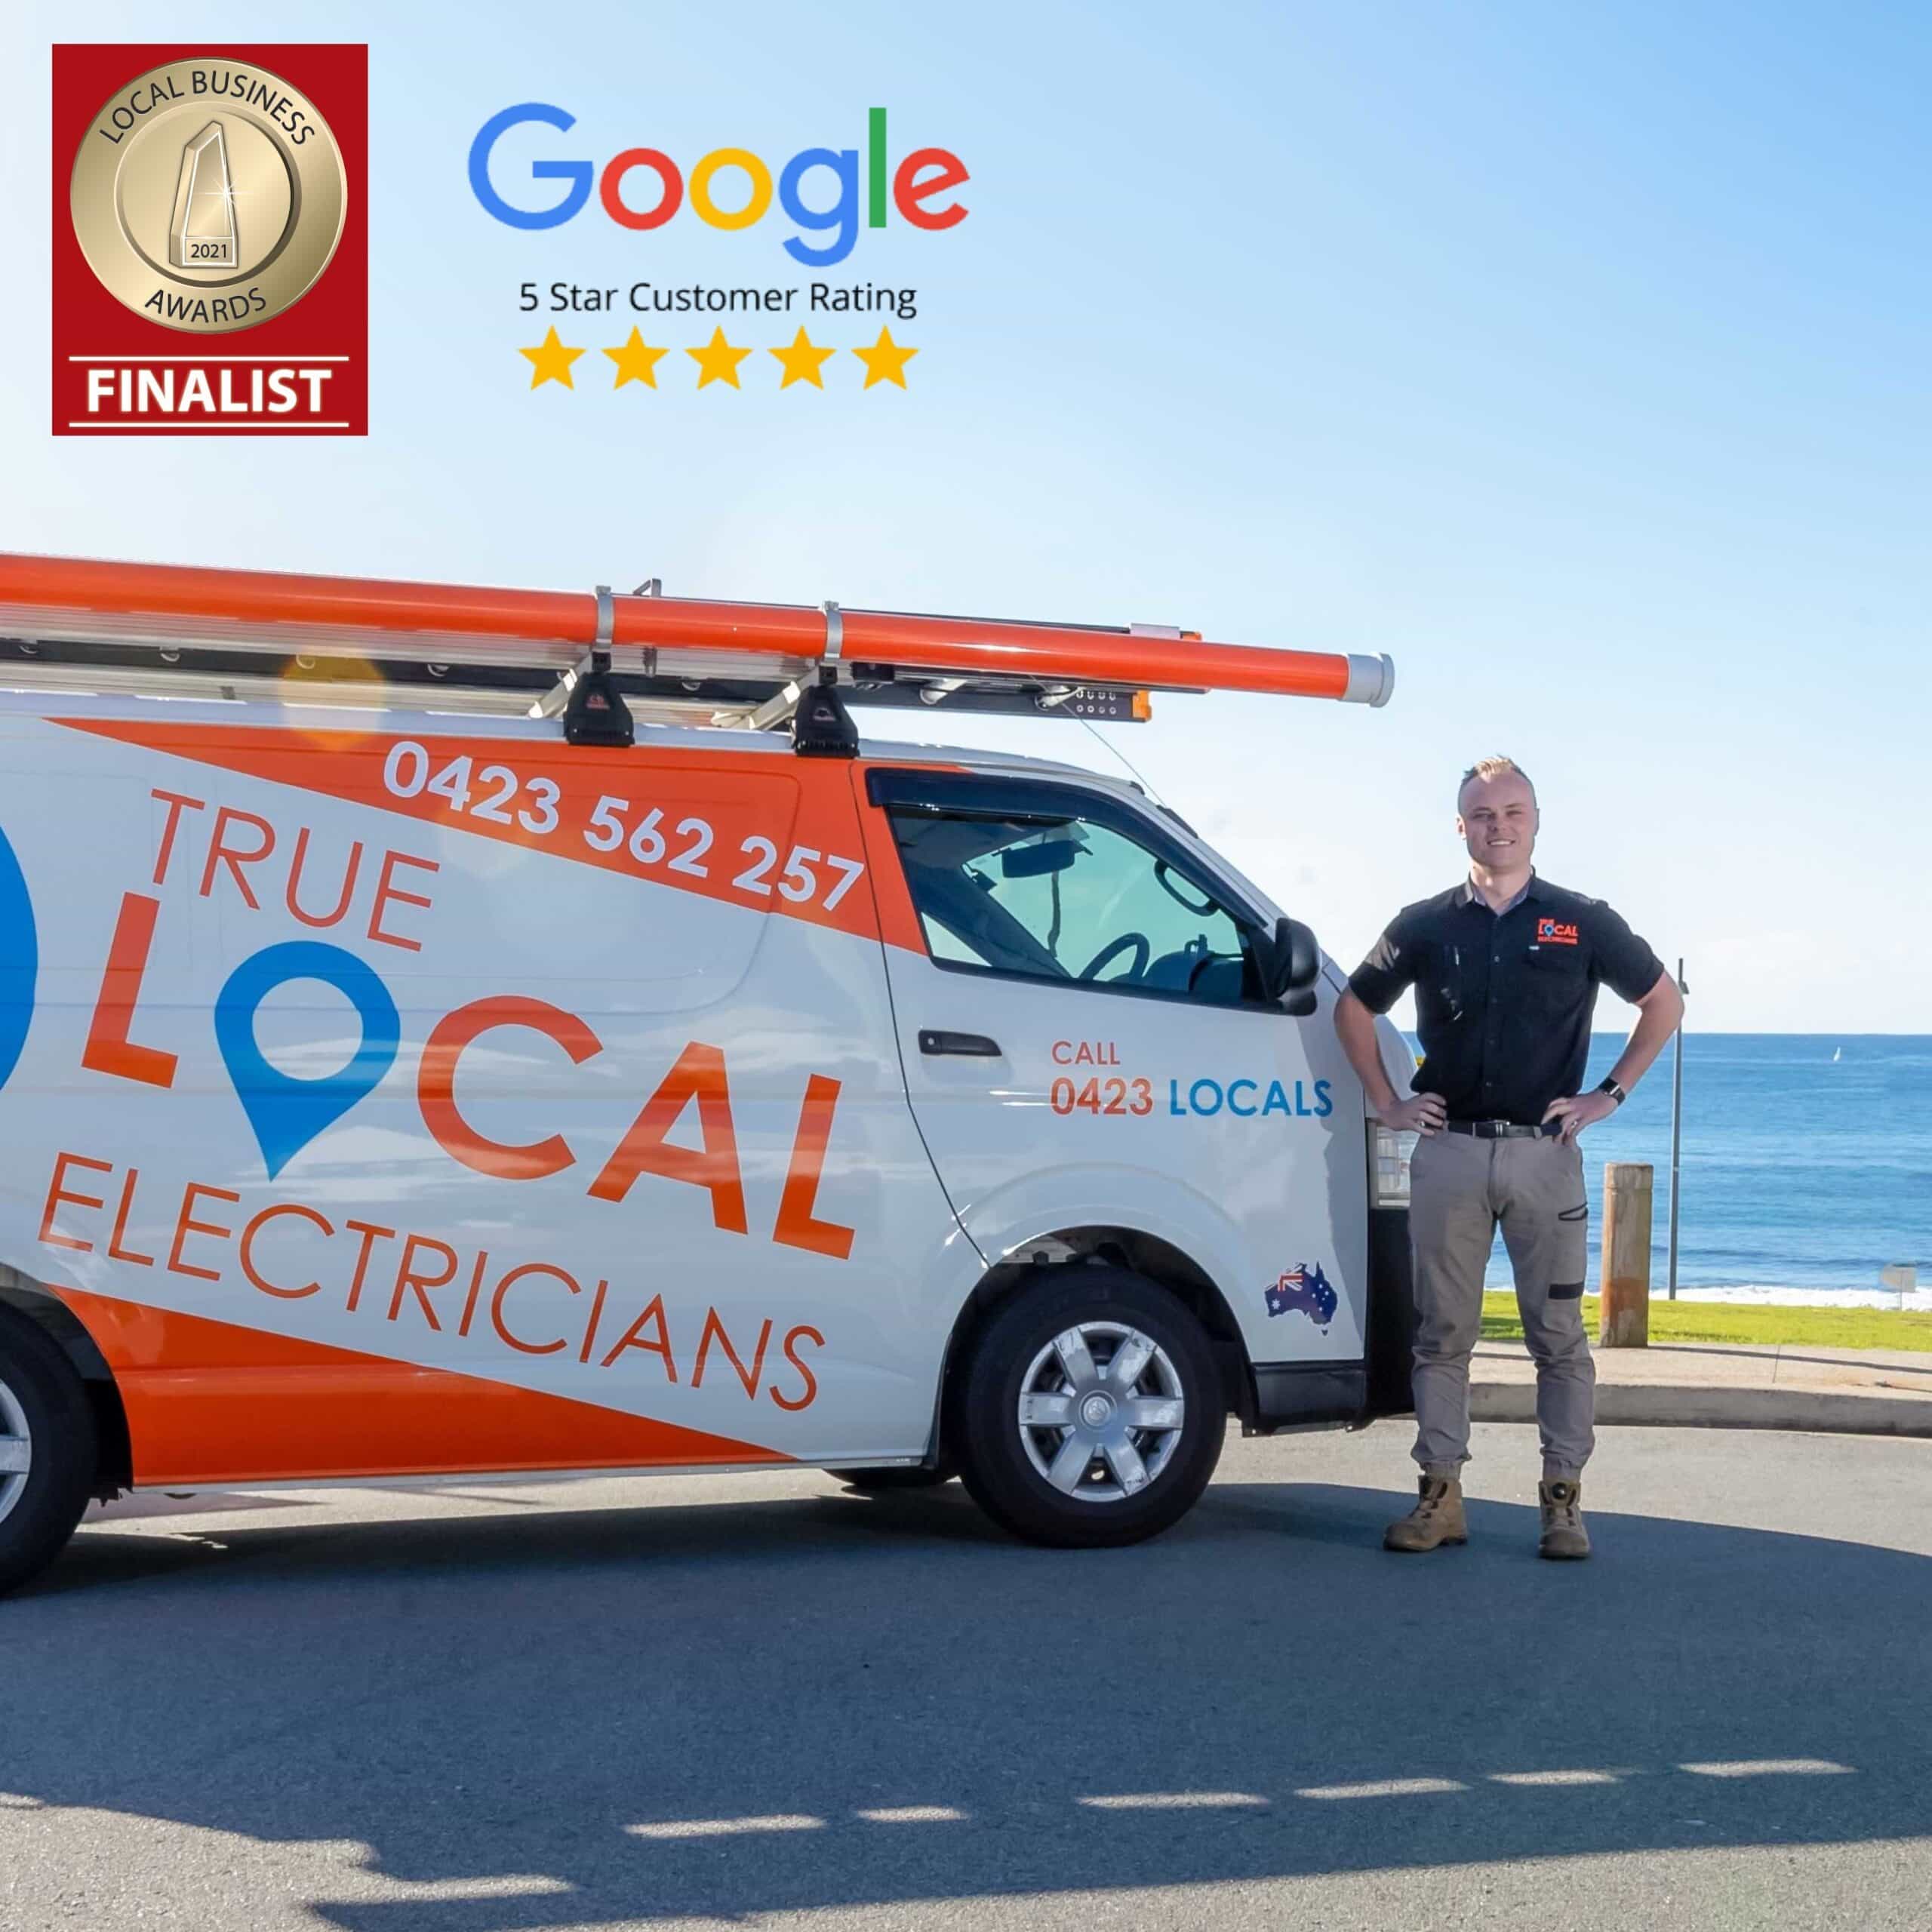 TL Electricians Campbelltown - local residential electrical service Campbelltown & Camden